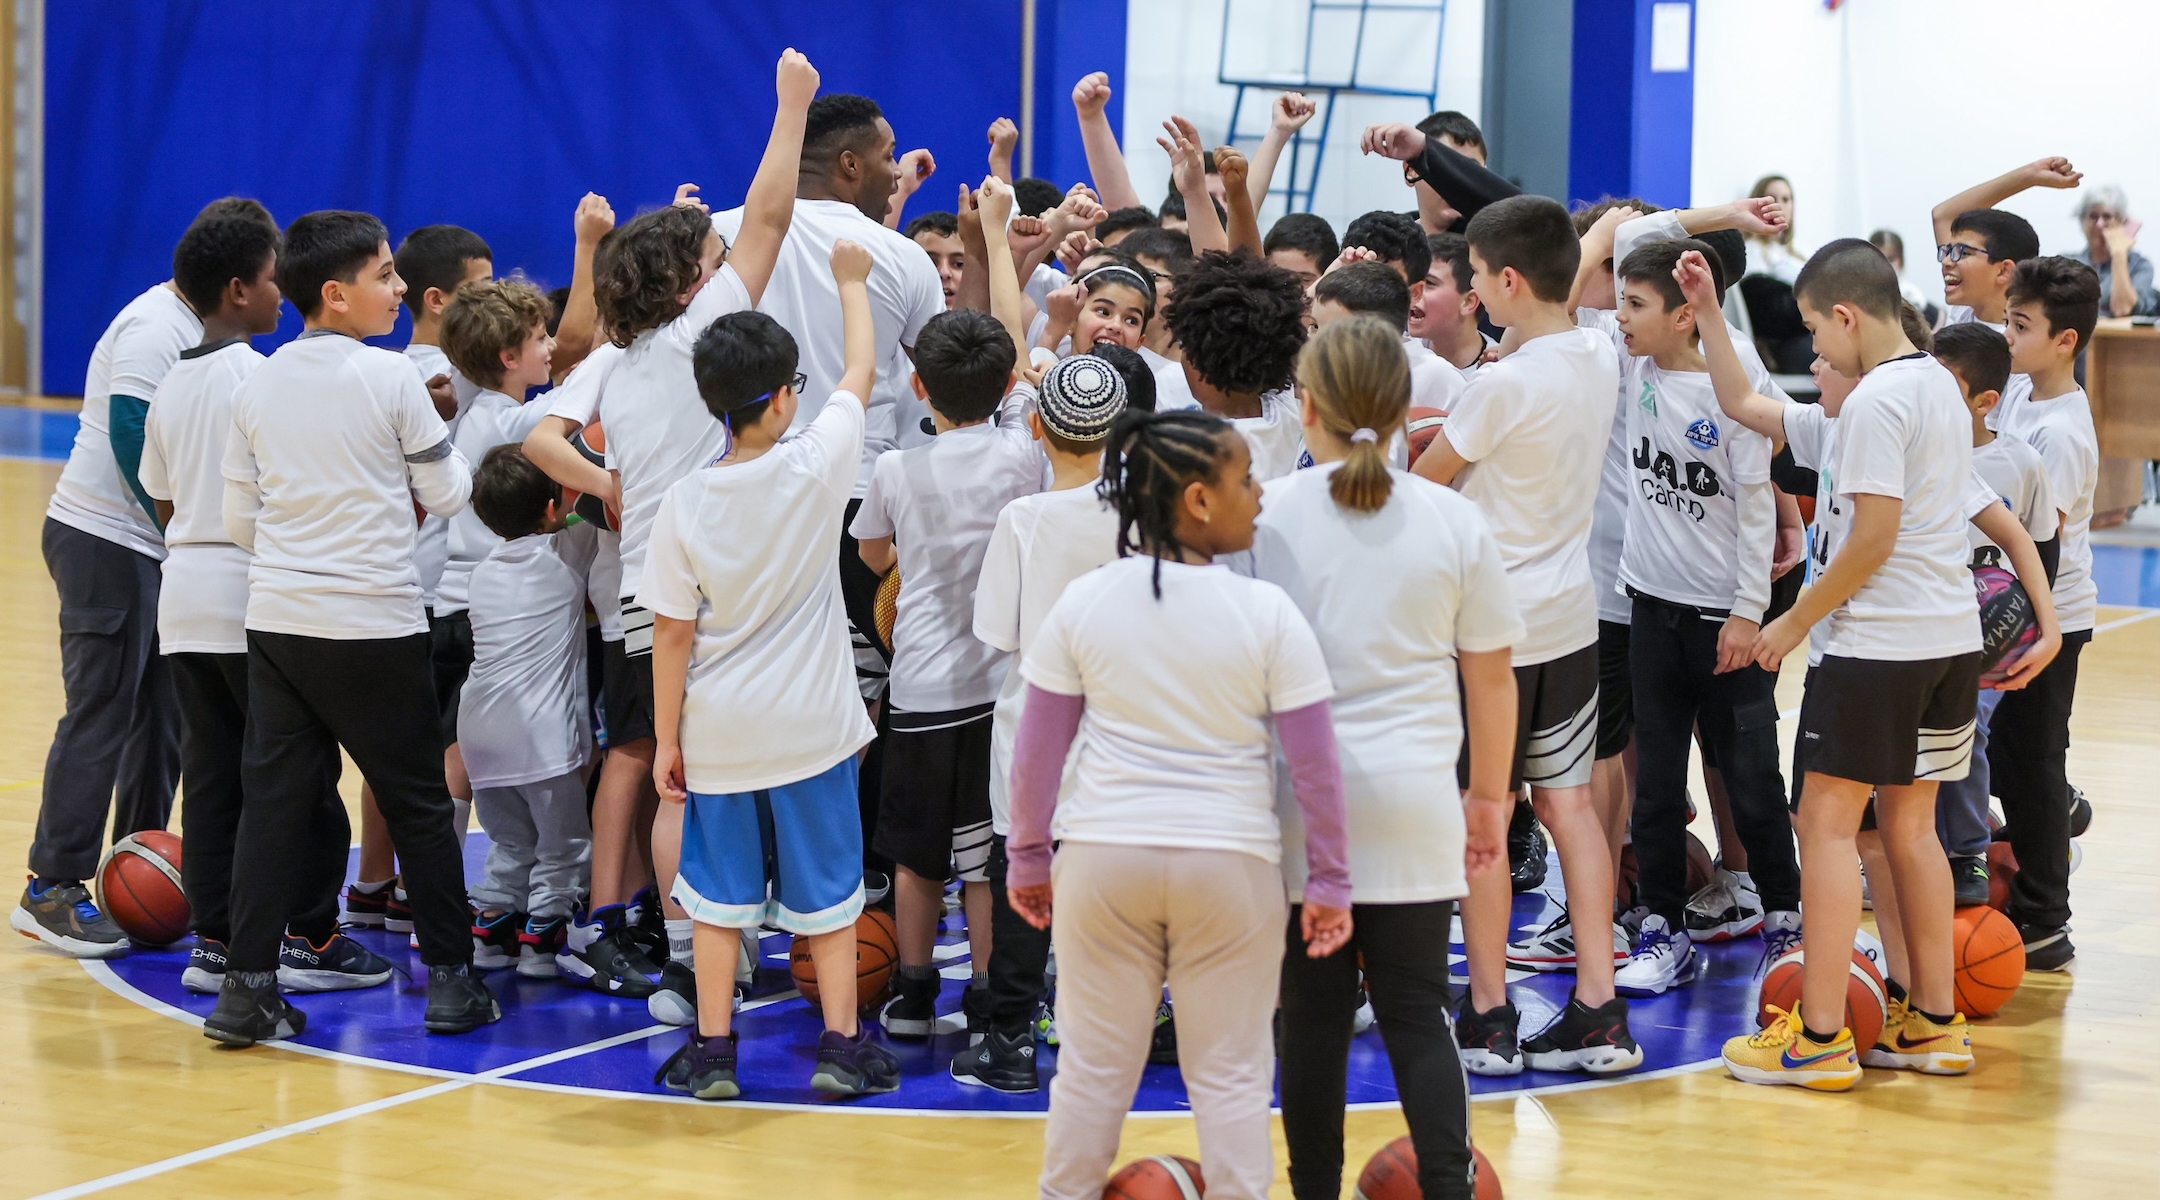 Jared Armstrong, center, is running free basketball clinics for children in Ashkelon, Israel. (Courtesy of Armstrong)